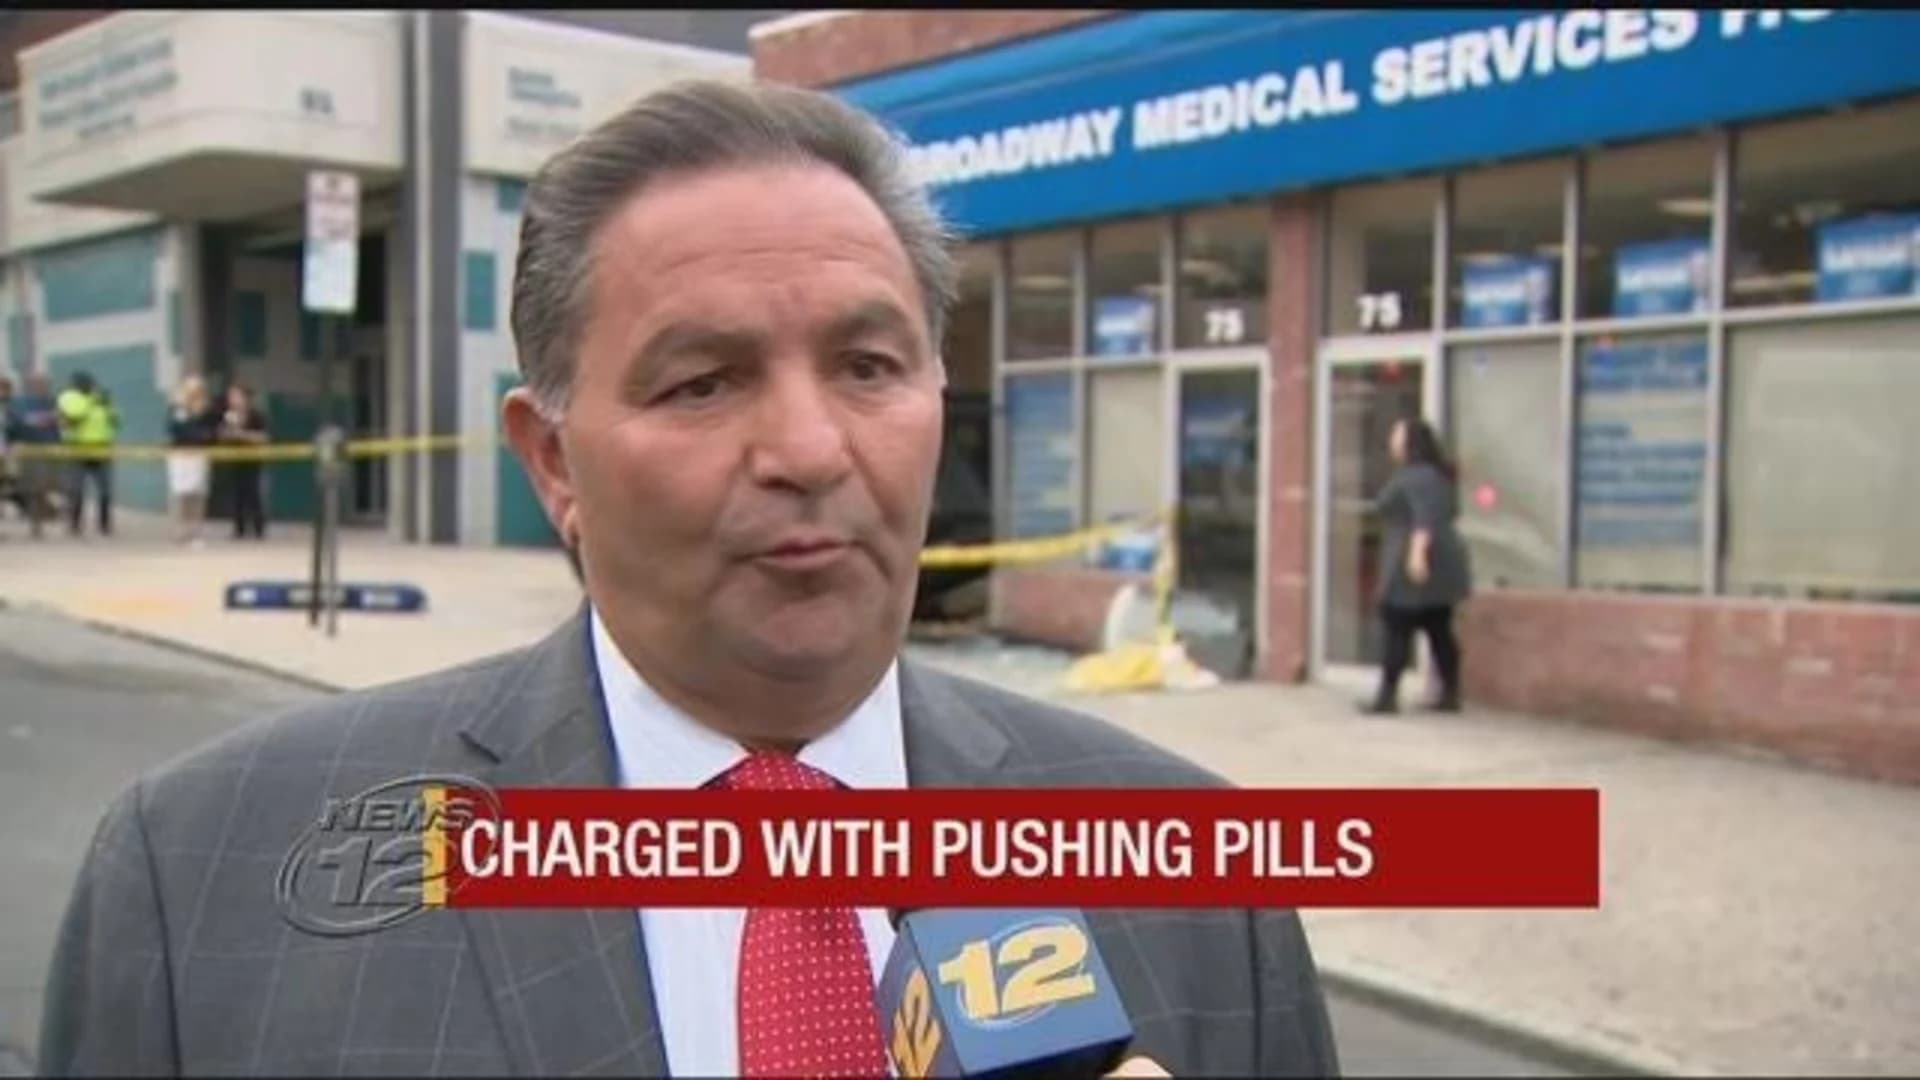 Yonkers doctor, White Plains pharmacist indicted in oxycodone crackdown